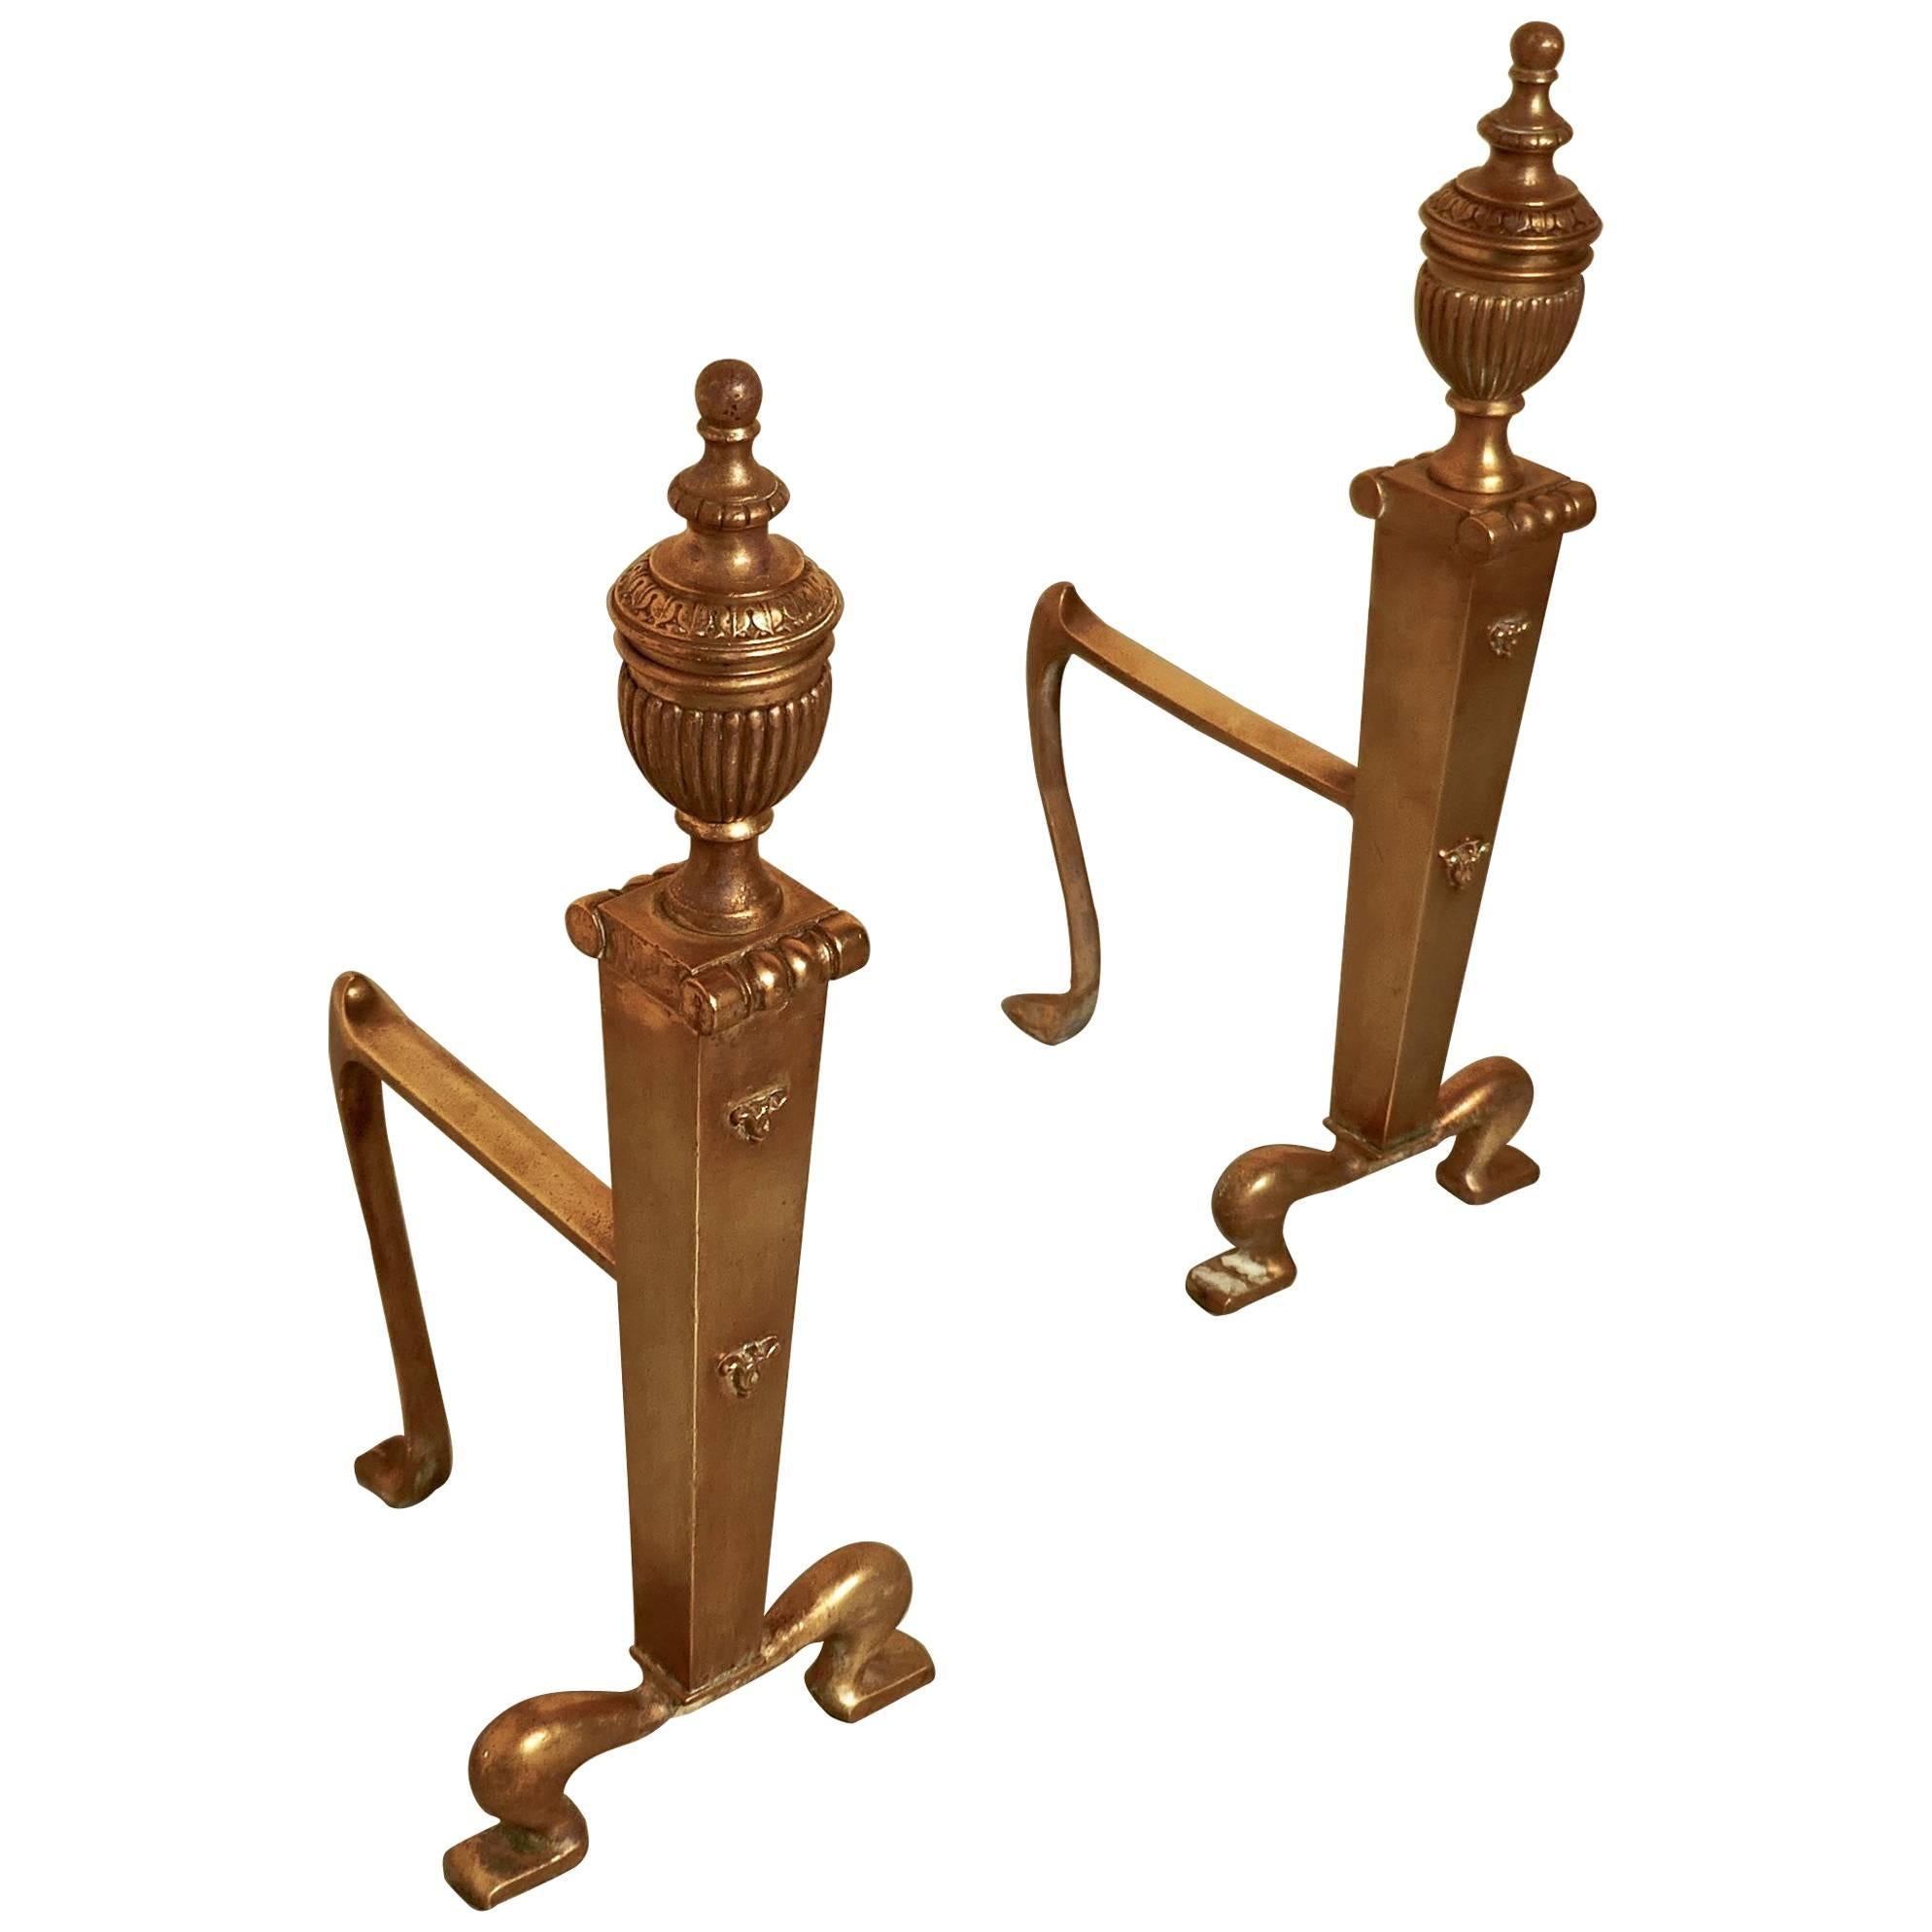 Elegant Pair of 19th Century Brass Andirons or Fire Dogs